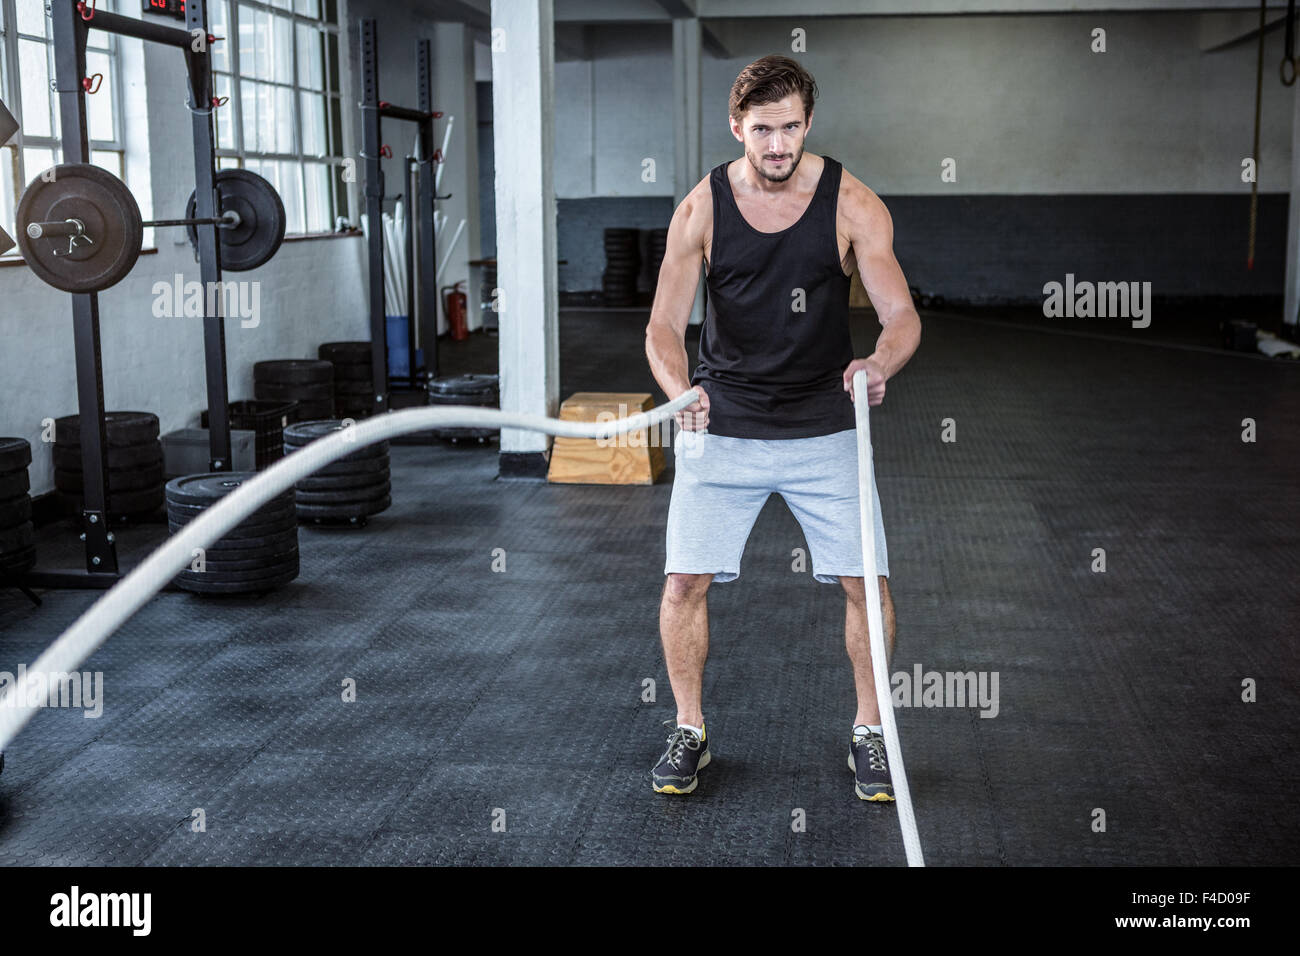 Fit man working out with battle ropes Stock Photo